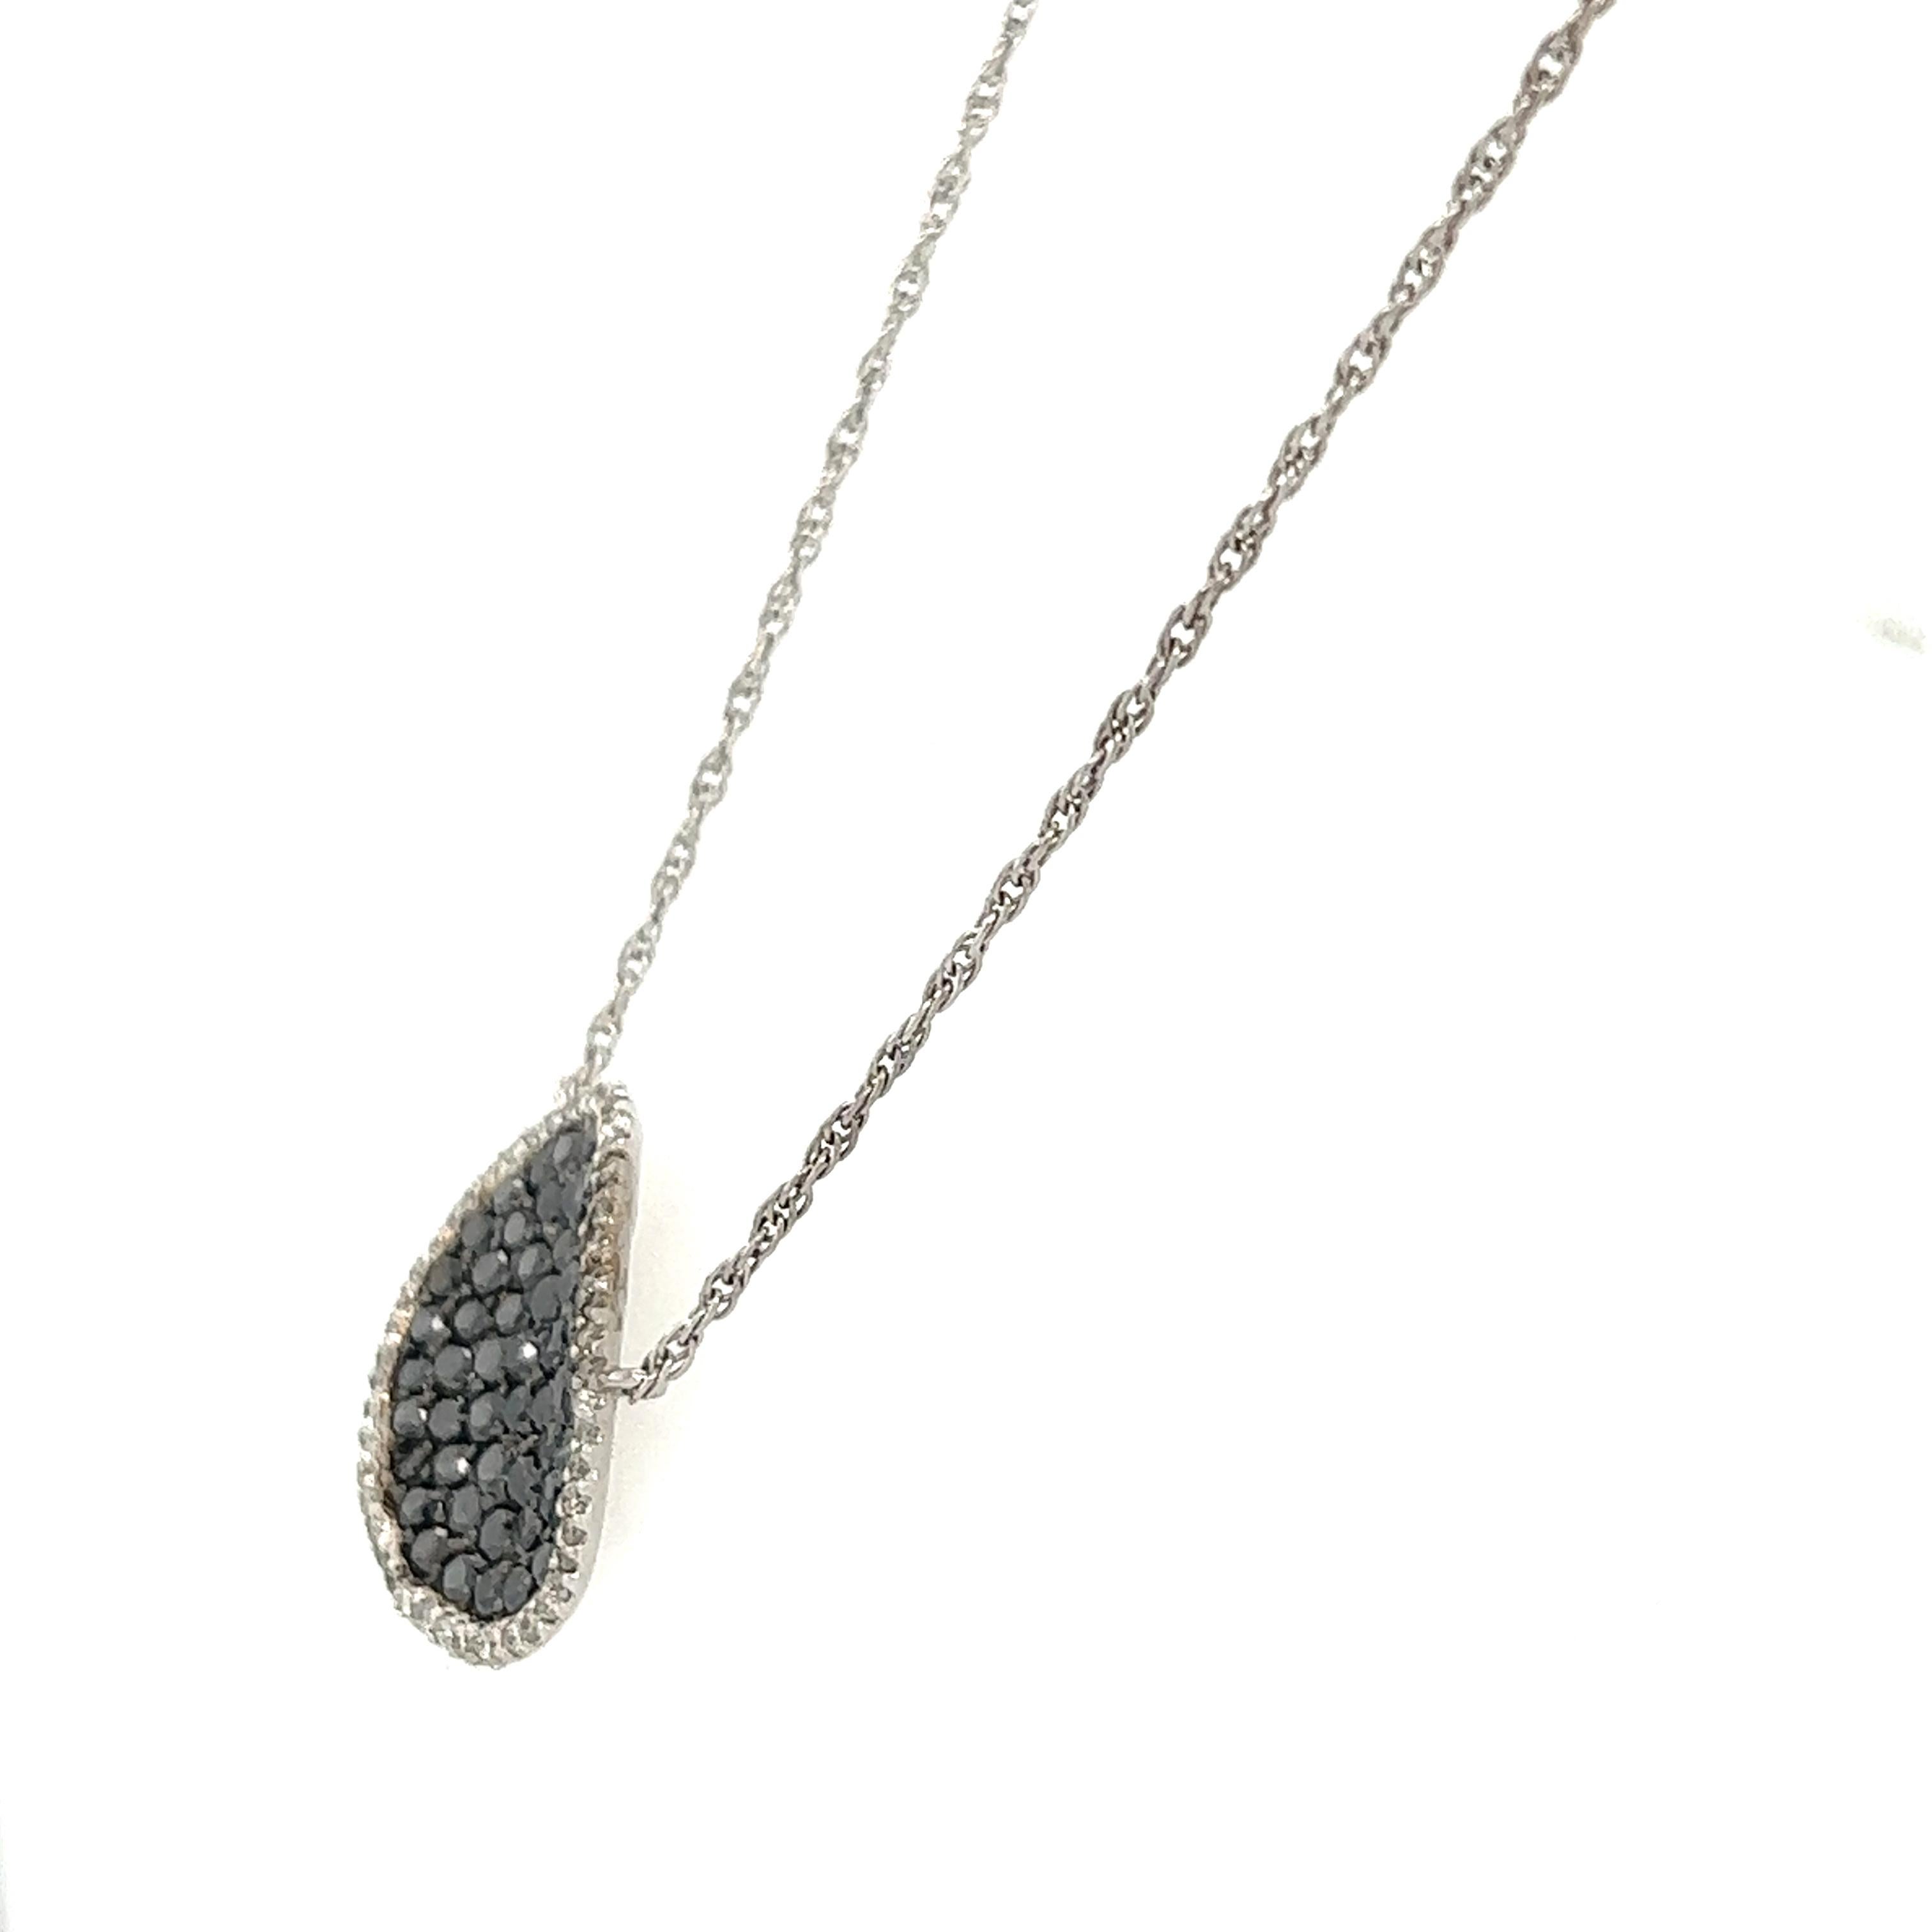 This necklace has Natural Black Diamonds that weigh 1.64 carats and Natural Round Cut Diamonds that weigh 0.38 carats. 
(Clarity: SI, Color: F) The total carat weight of the chain necklace is 2.02 carats.

The necklace is made in 14 Karat White Gold